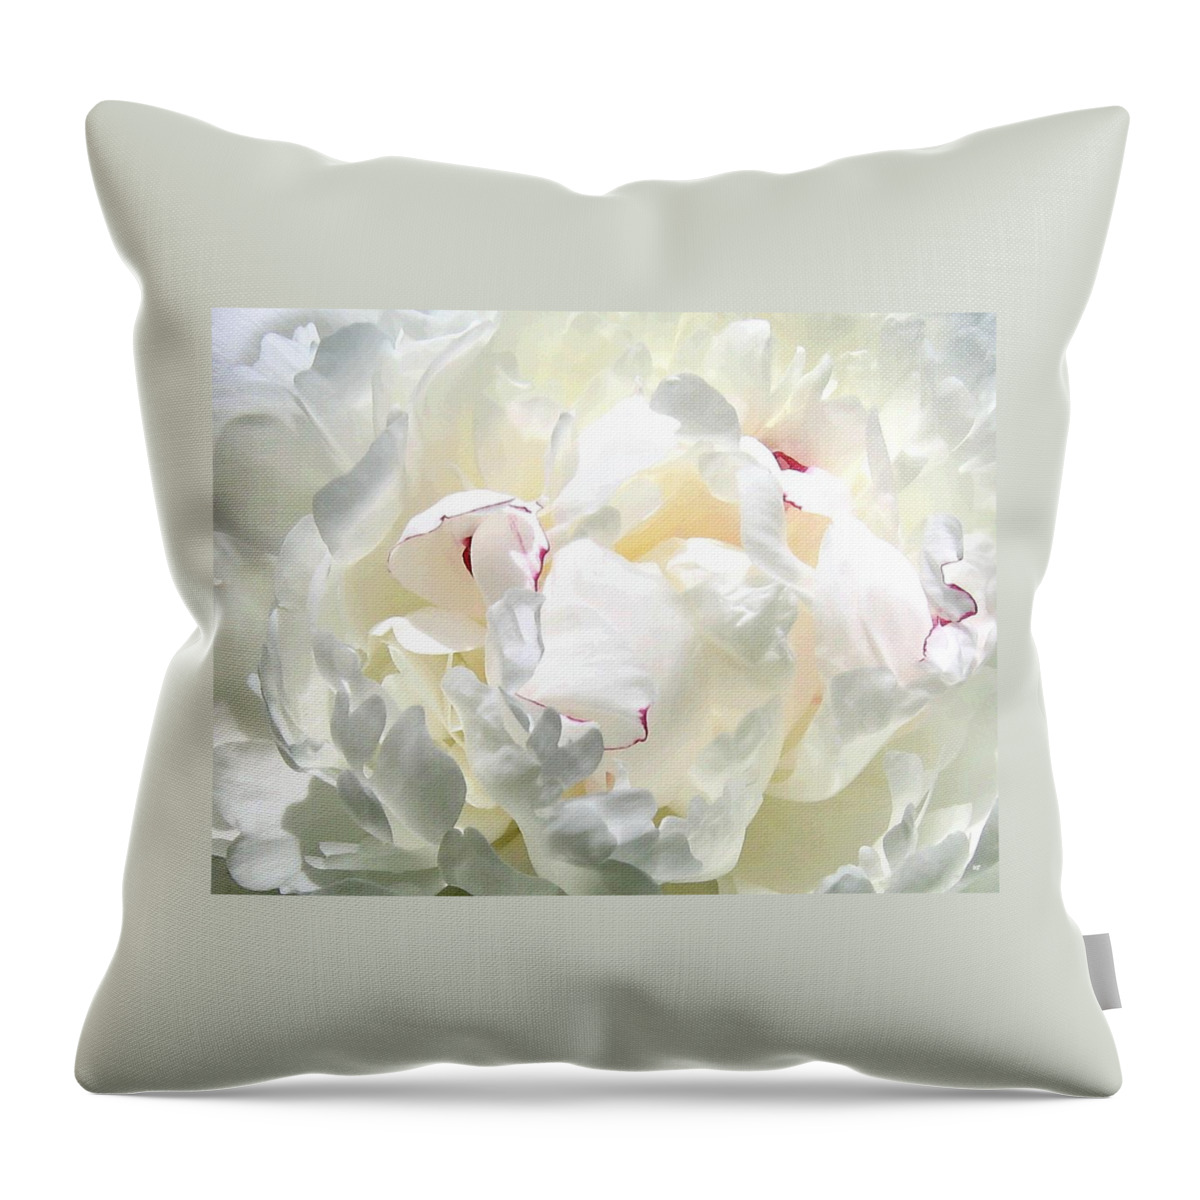  White Peony Throw Pillow featuring the photograph White Peony by Will Borden